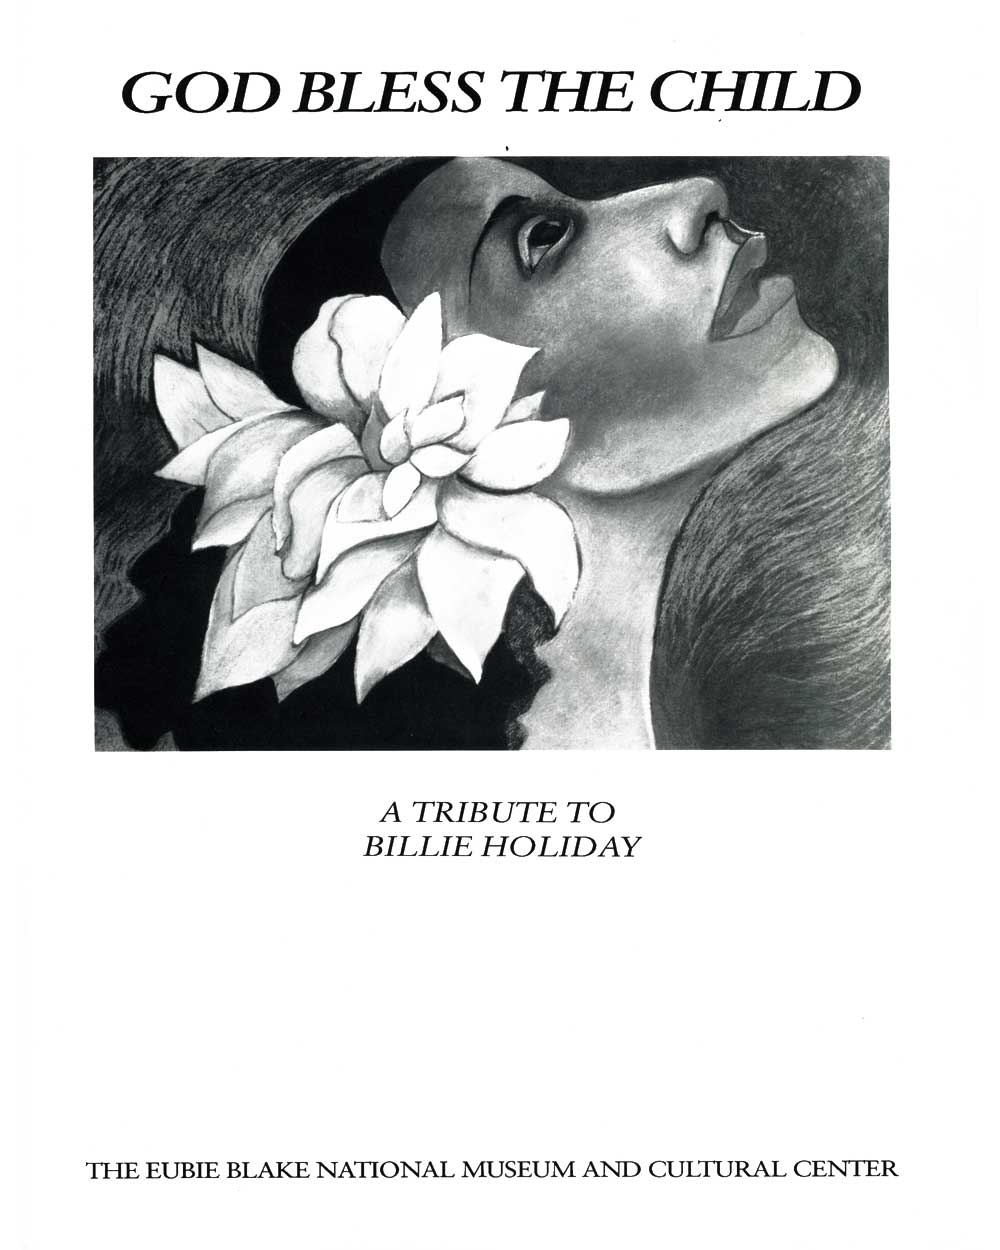 God Bless the Child, exhibition catalog, cover